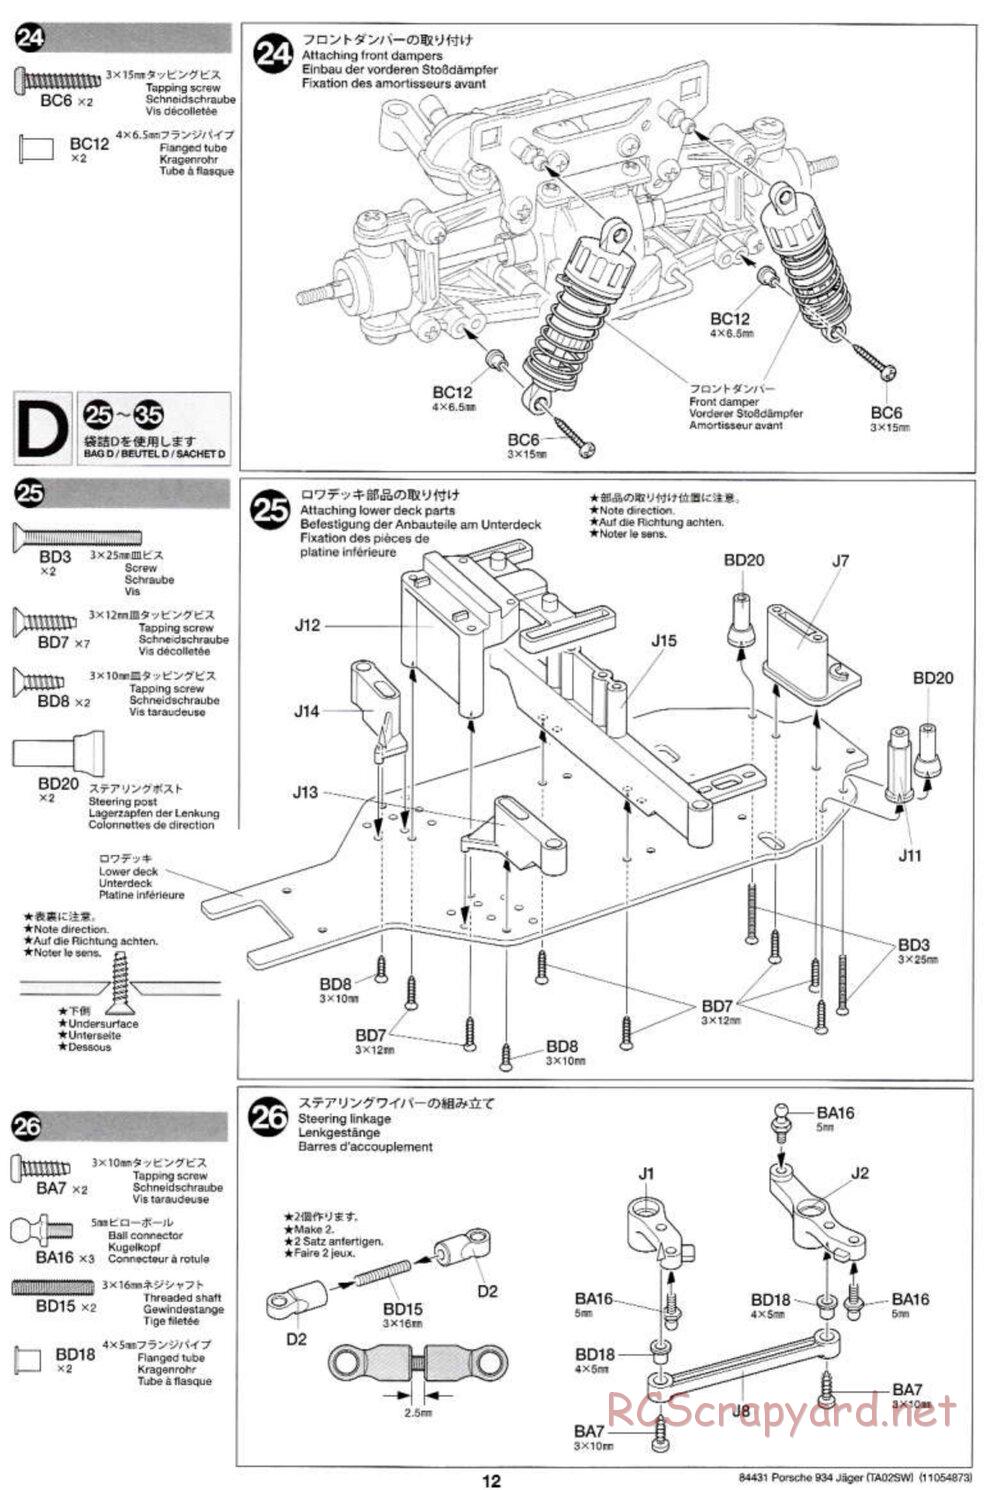 Tamiya - Porsche Turbo RSR Type 934 Jagermeister - TA-02SW Chassis - Manual - Page 12